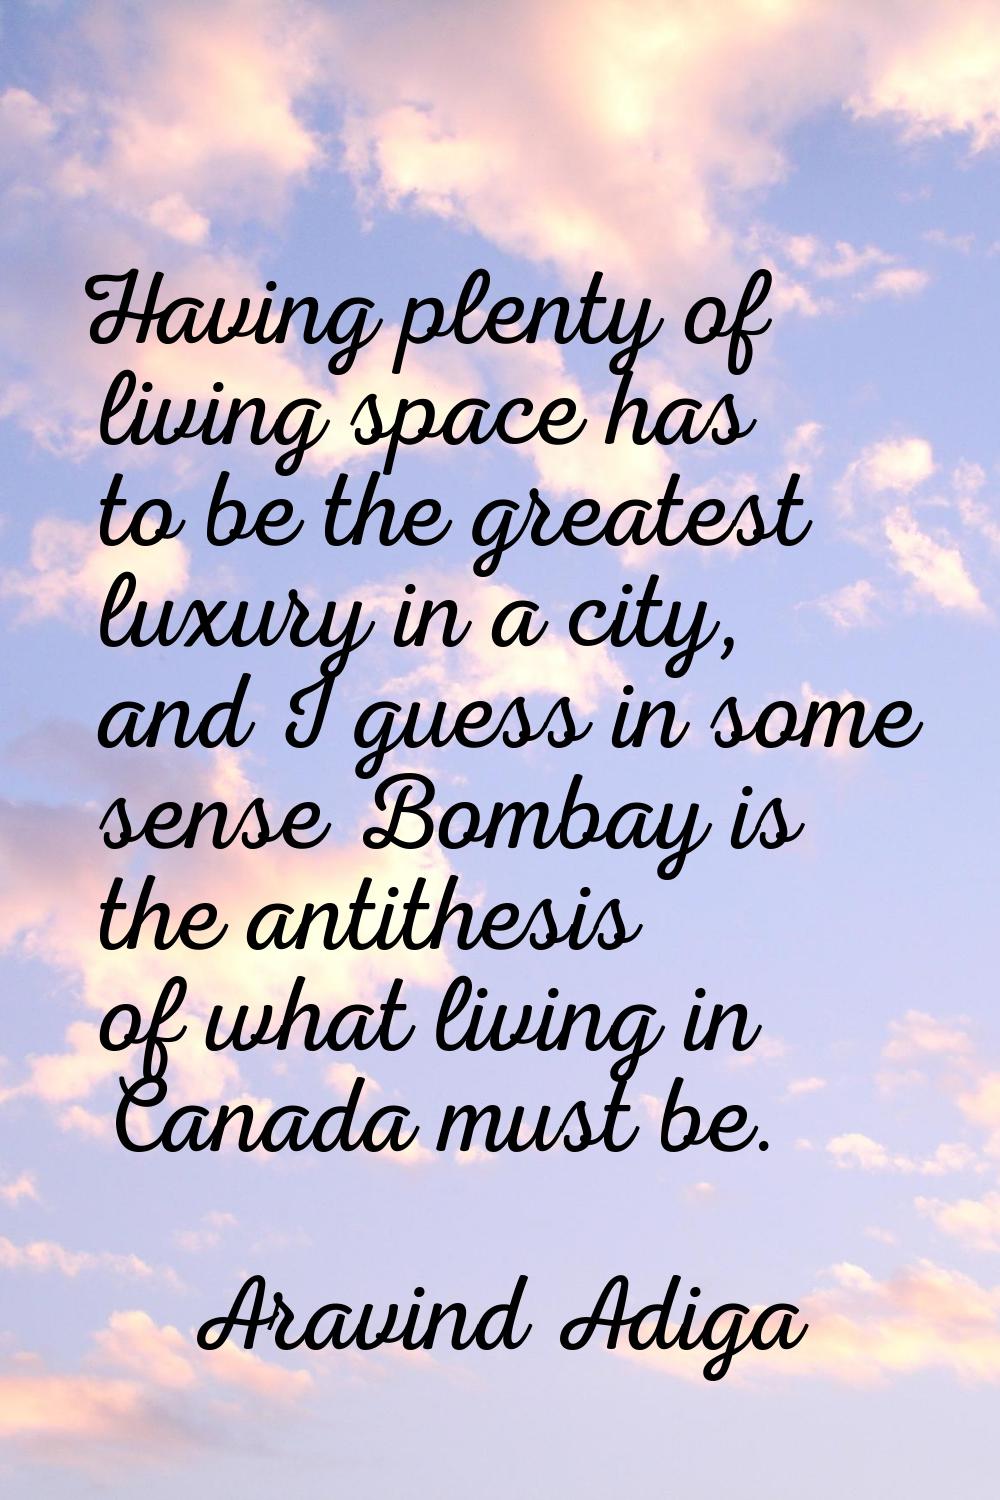 Having plenty of living space has to be the greatest luxury in a city, and I guess in some sense Bo